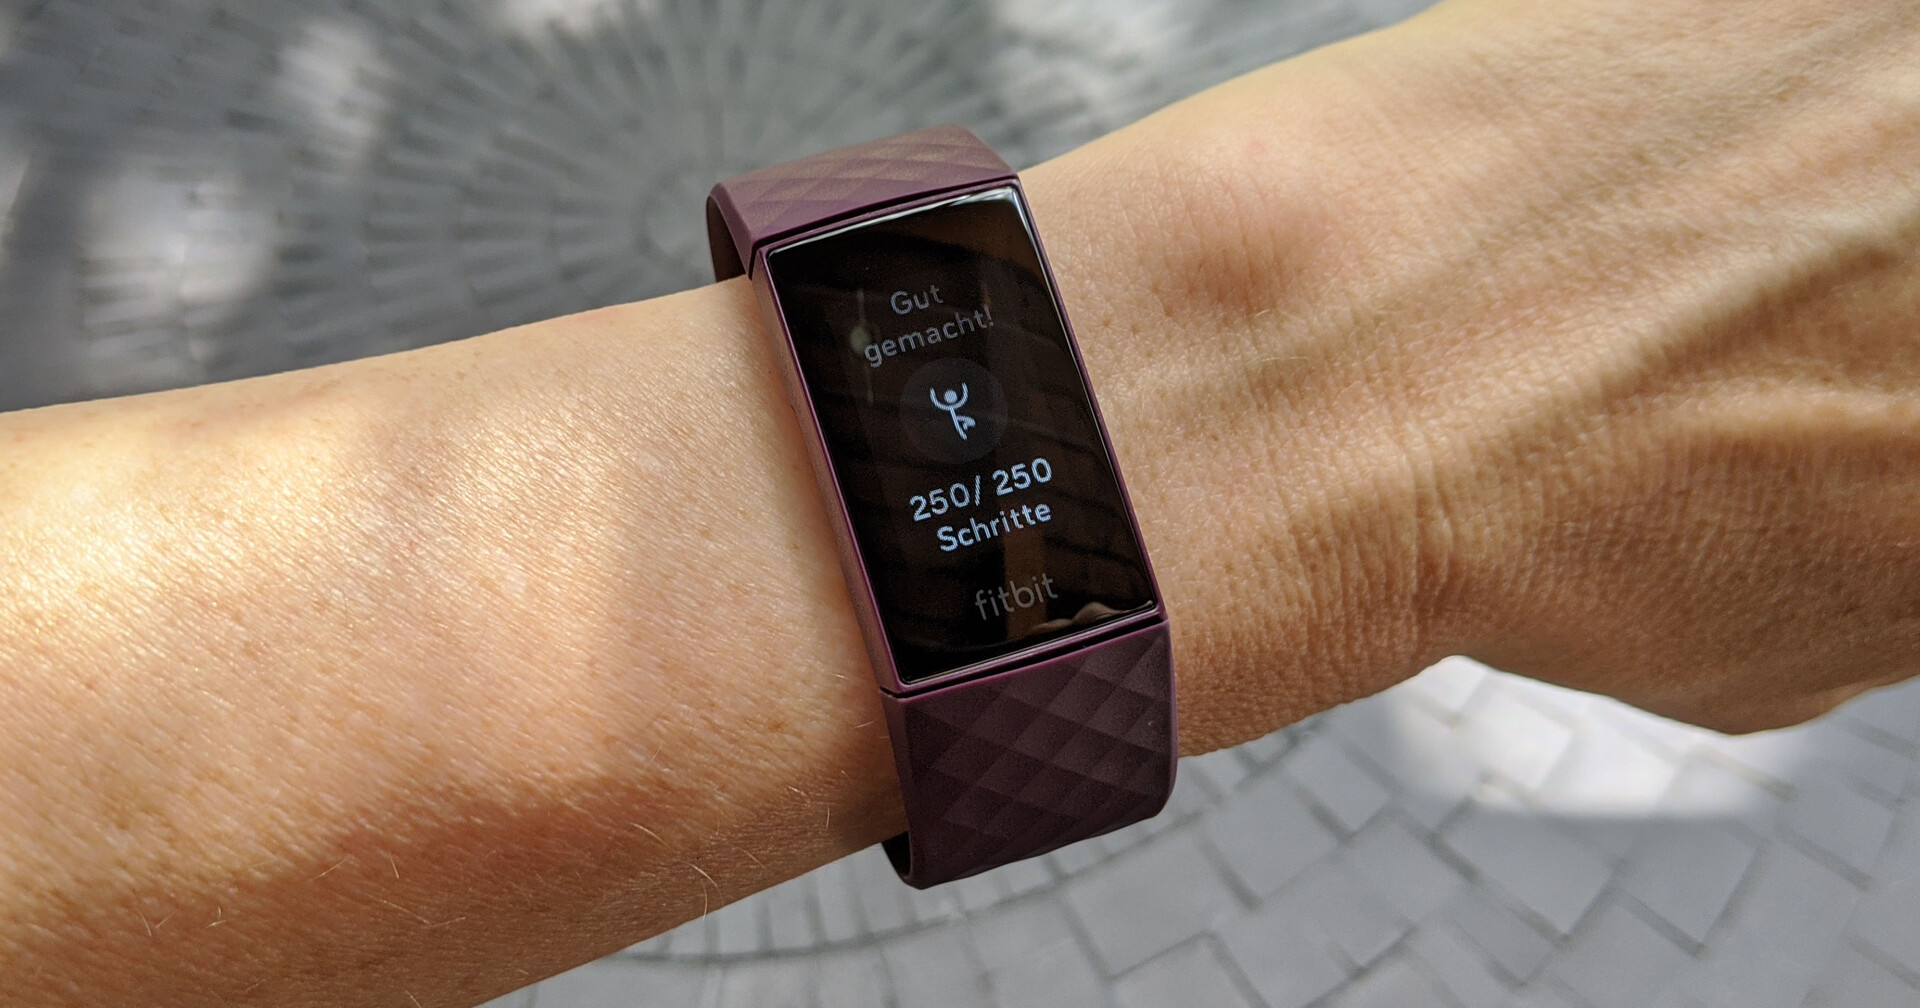 fitbit with huawei